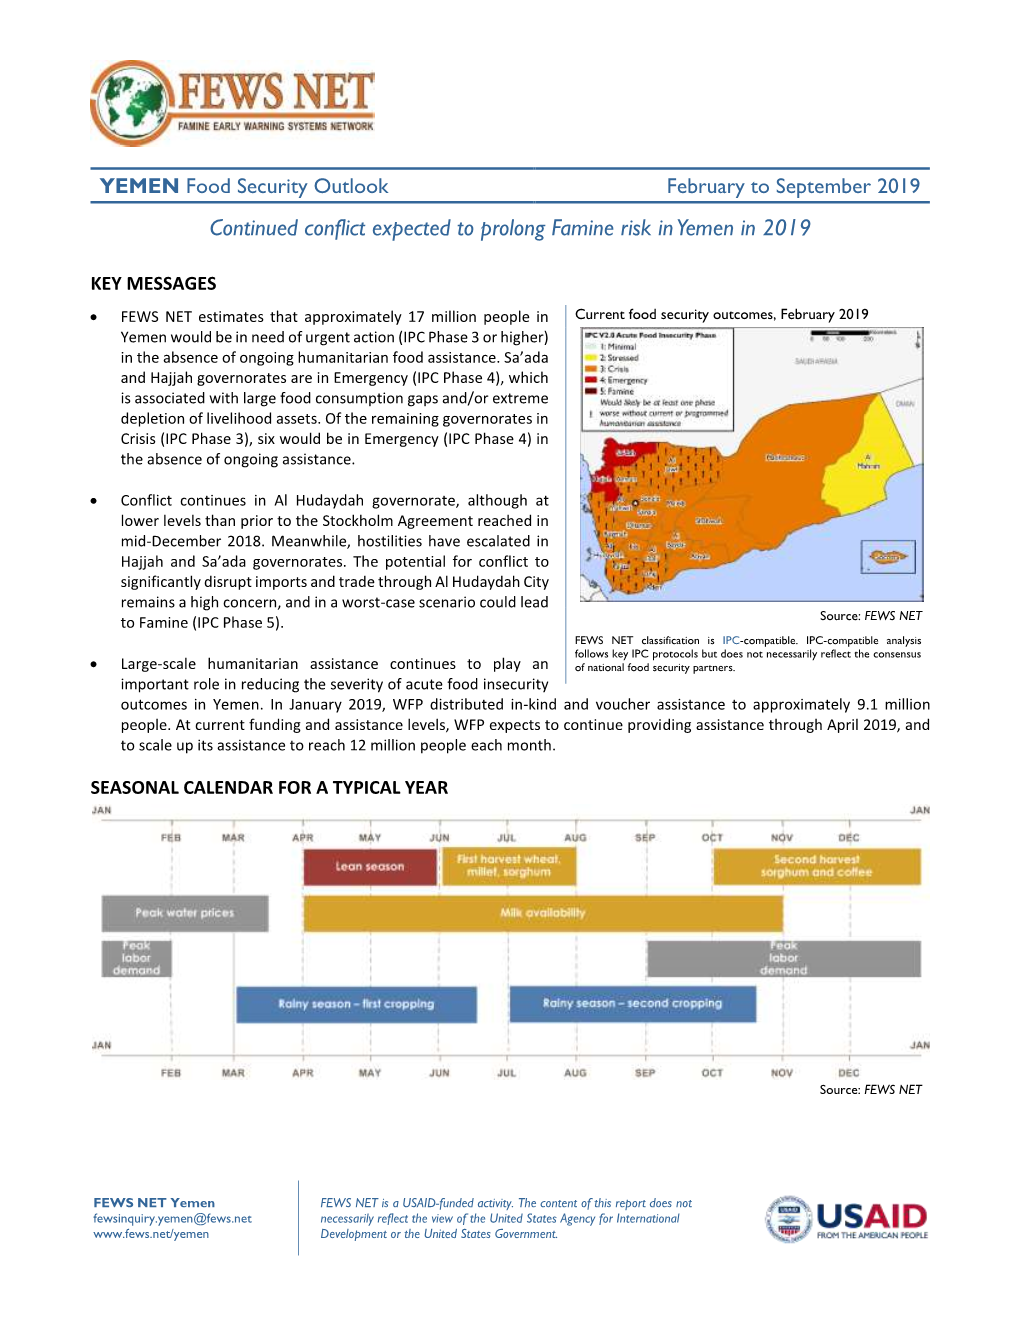 YEMEN Food Security Outlook February to September 2019 Continued Conflict Expected to Prolong Famine Risk in Yemen in 2019